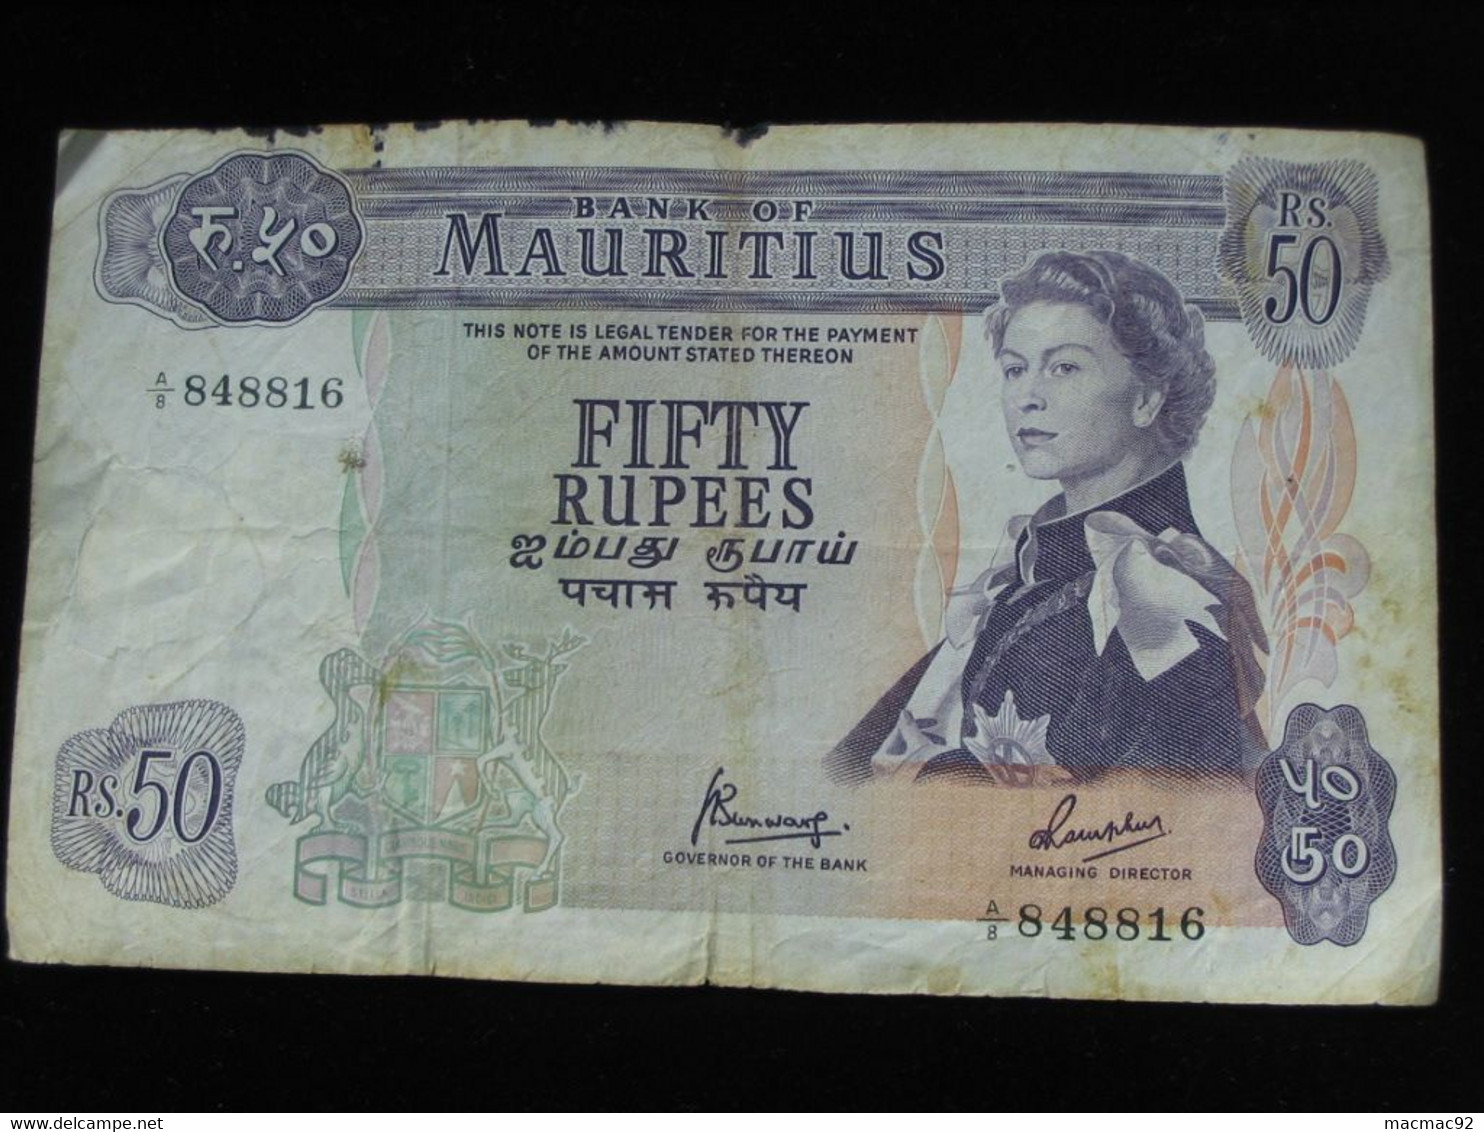 50 FIFTY Rupees 1967 - ILE MAURICE - Bank Of Mauritius  **** EN ACHAT IMMEDIAT ***** - Mauritius